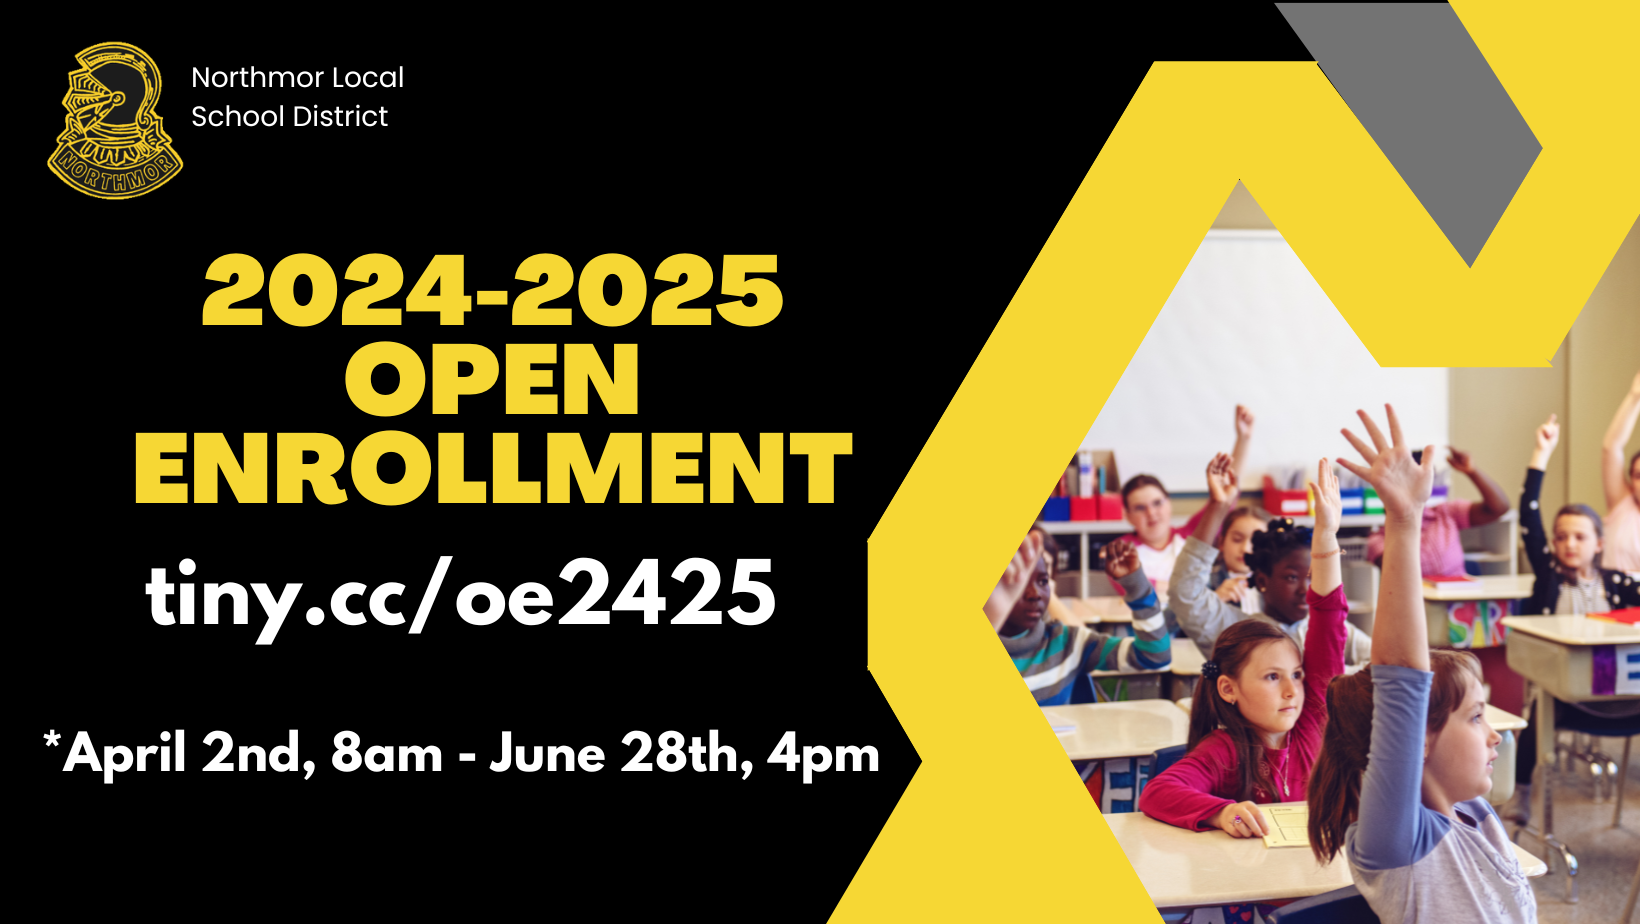 northmor local school district 2024-2025 open enrollment tiny.cc/oe2425 *April 2nd, 8am- June 28th, 4pm with photo of students in classroom with black and yellow graphics